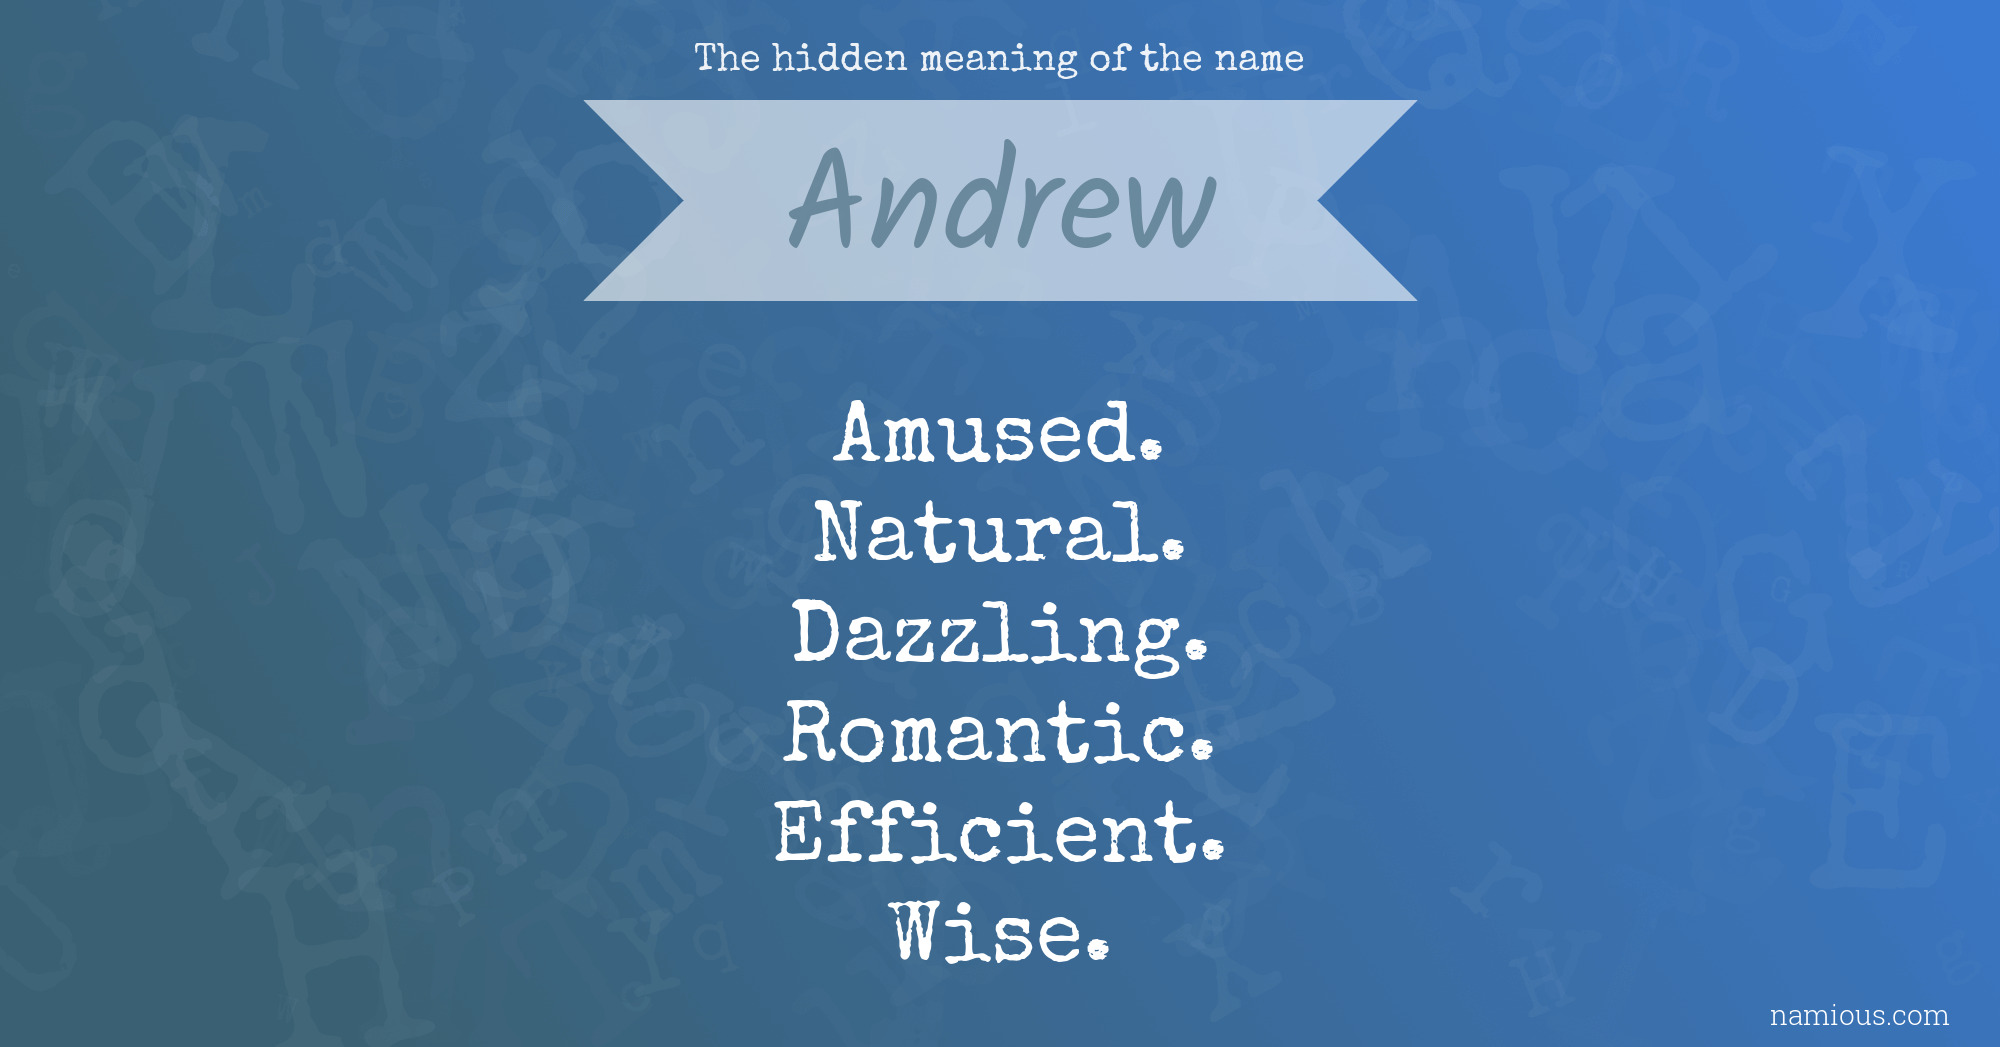 The hidden meaning of the name Andrew